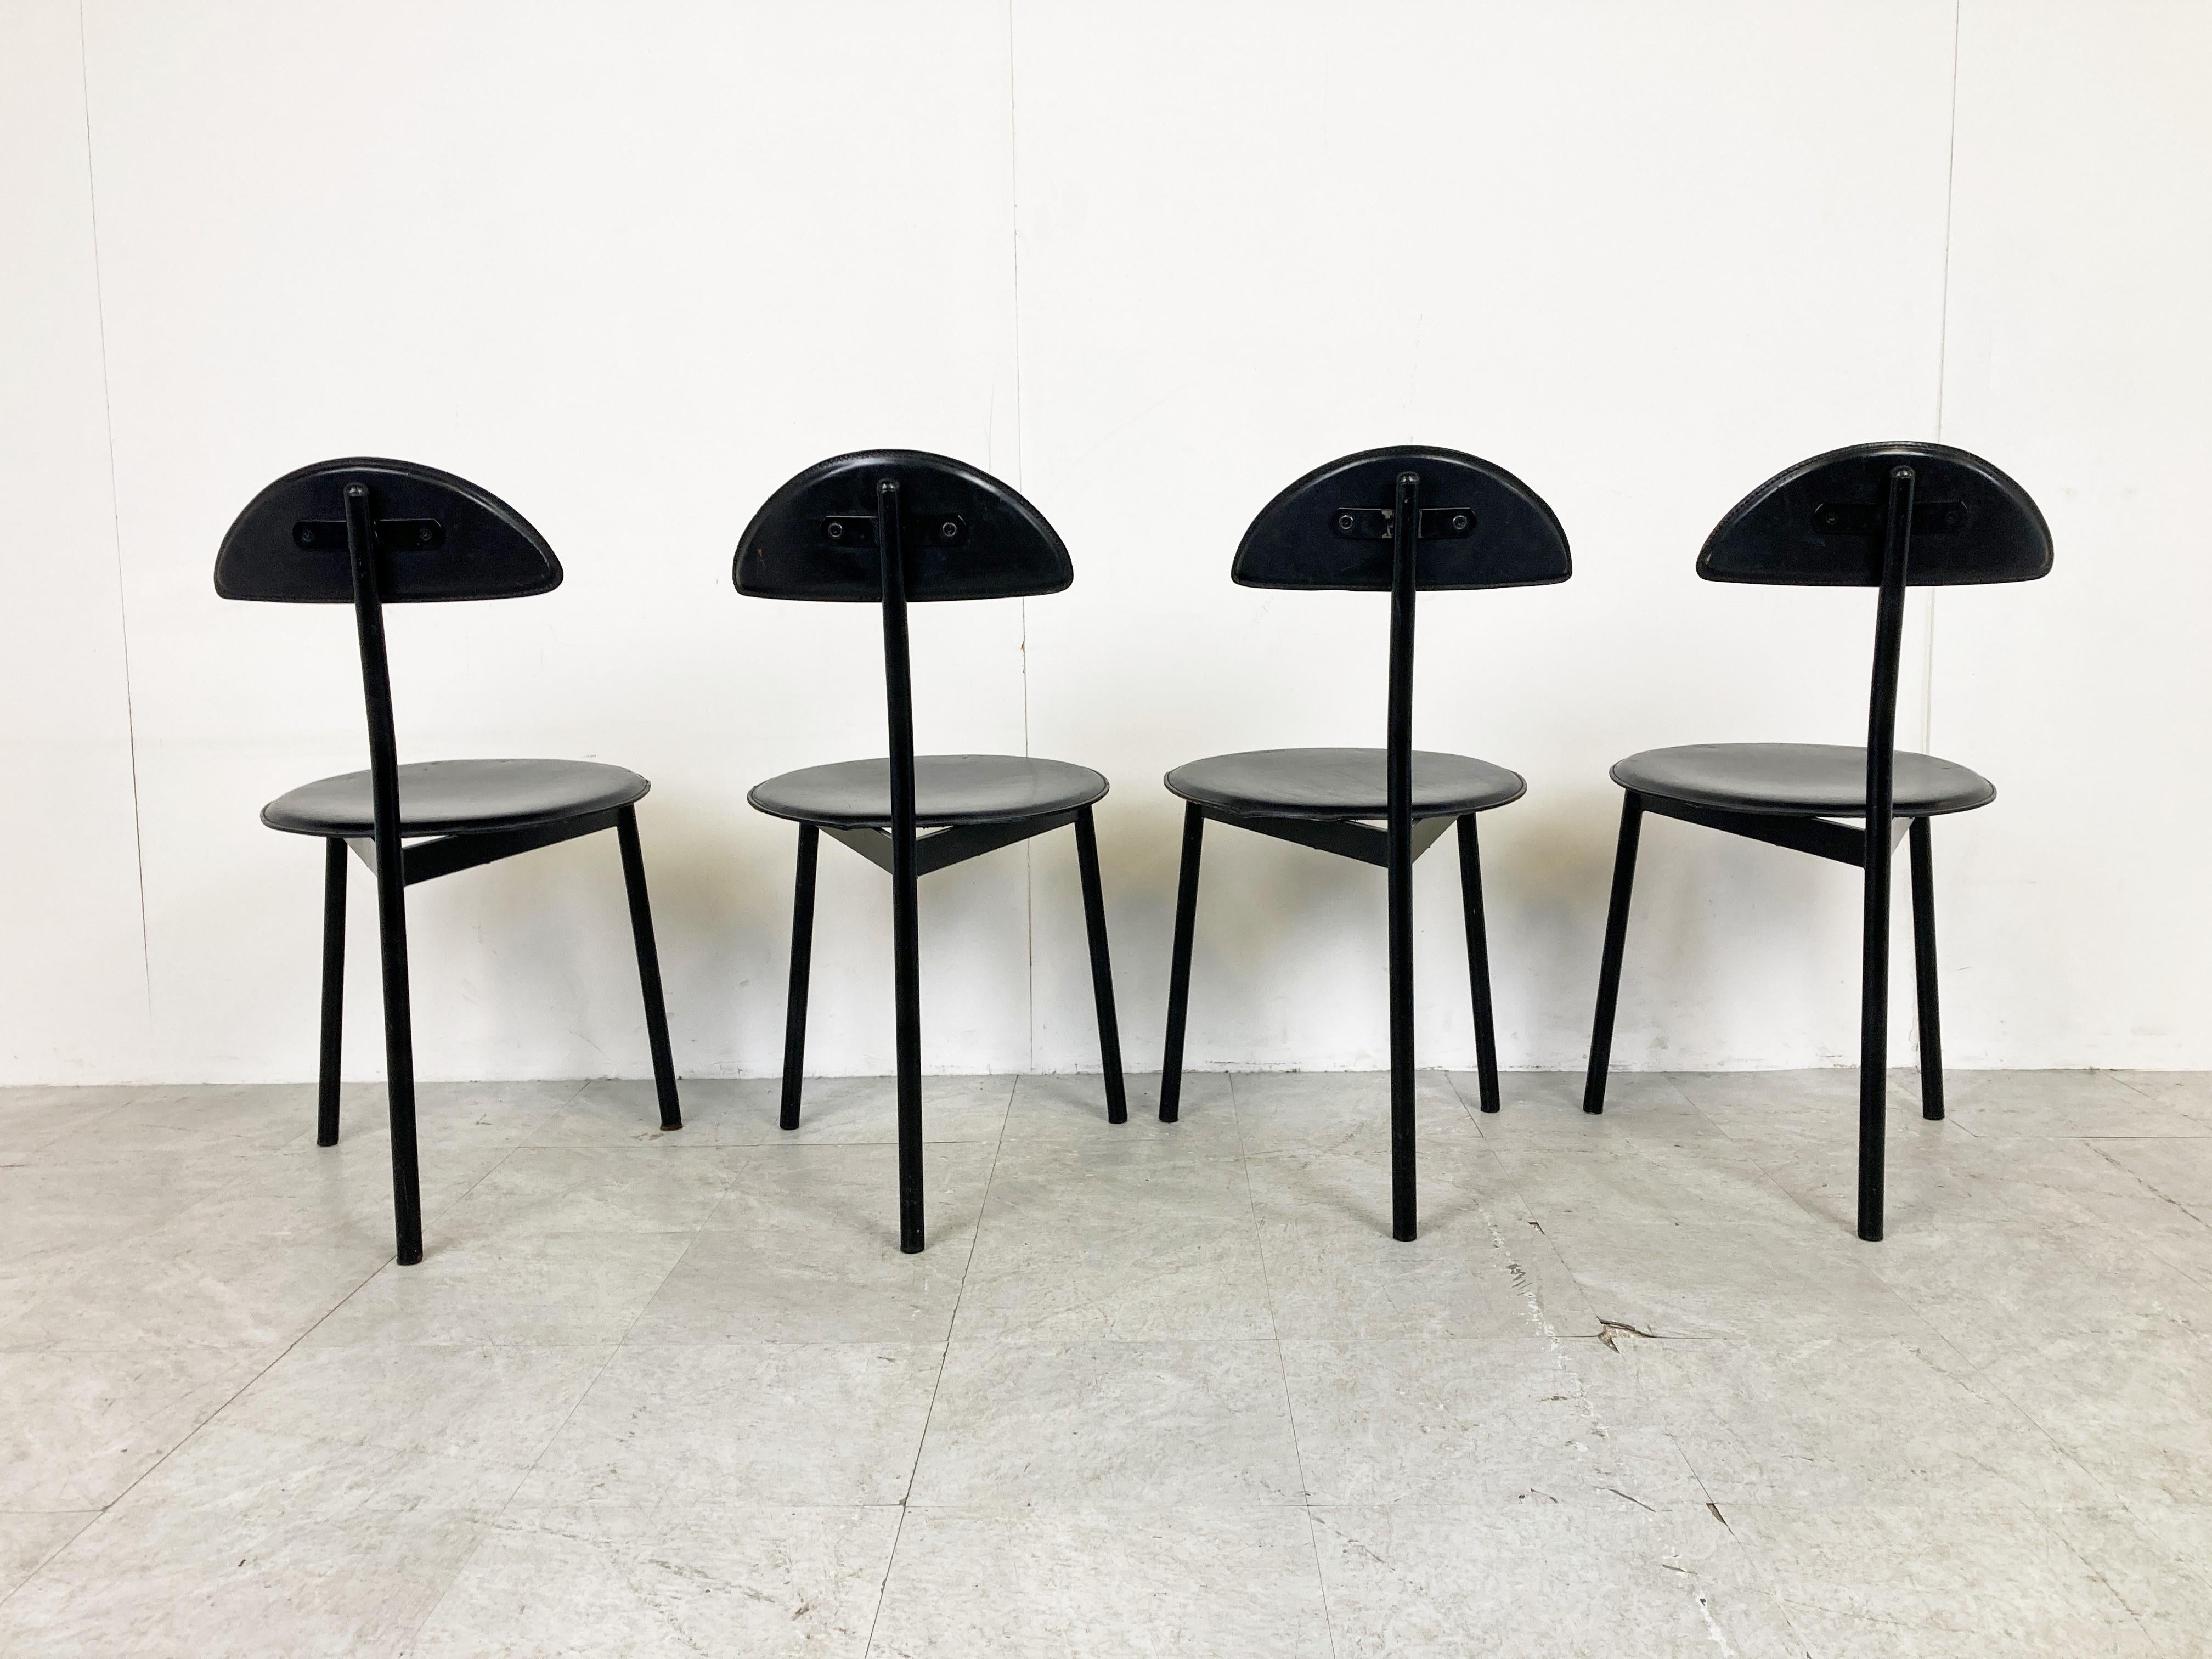 Metal Set of 4 Post Modern Dining Chairs by Linea Veam, 1980s For Sale